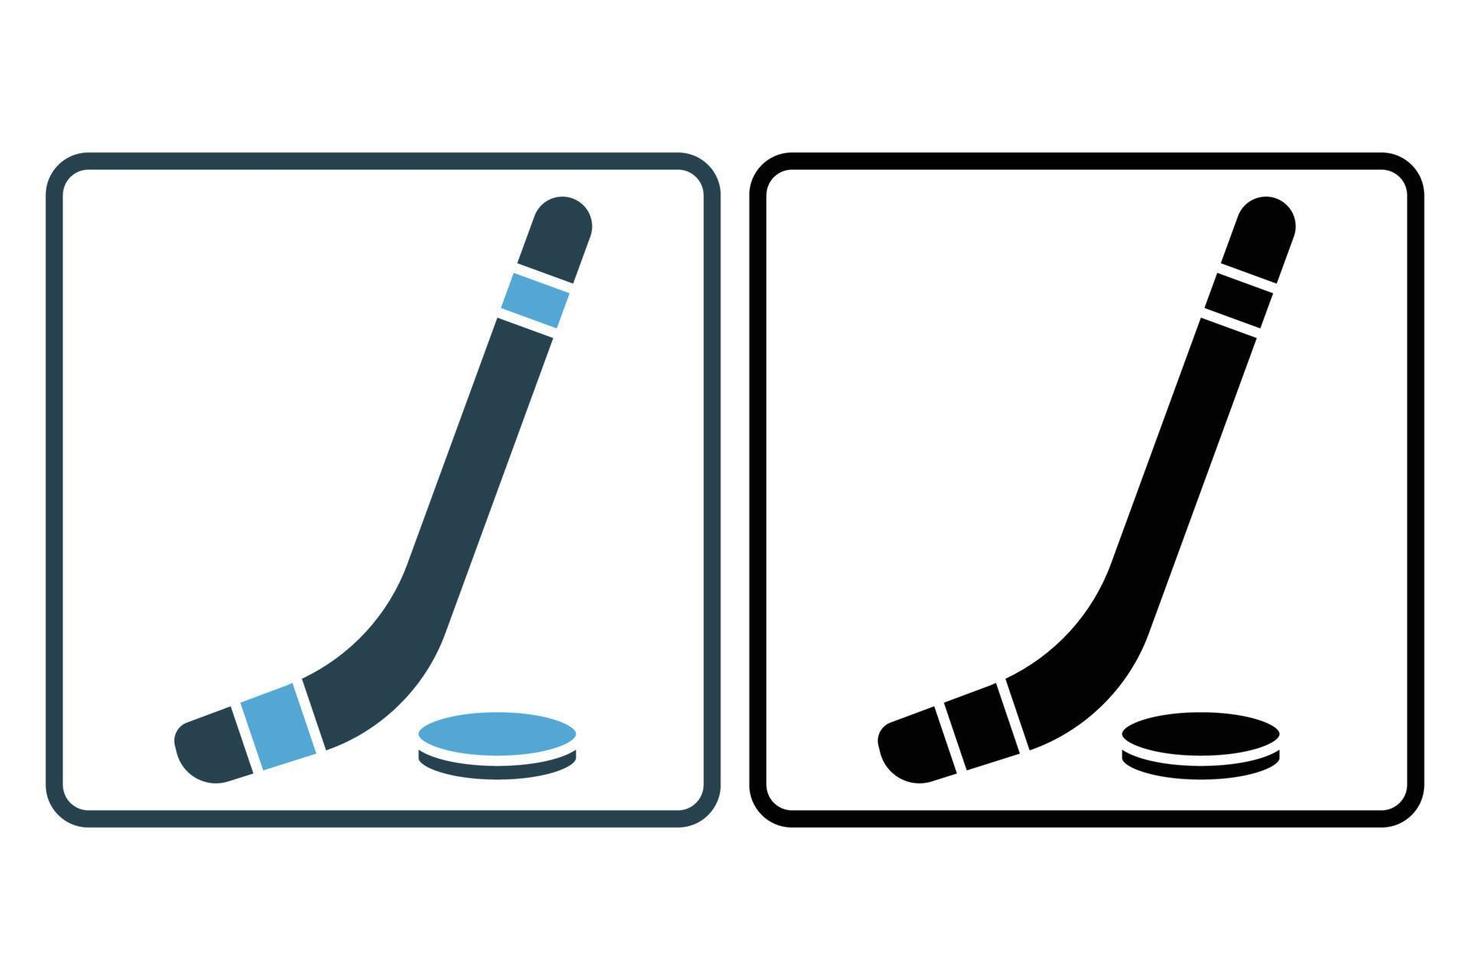 Hockey icon illustration. icon related to sport. Solid icon style. Simple vector design editable